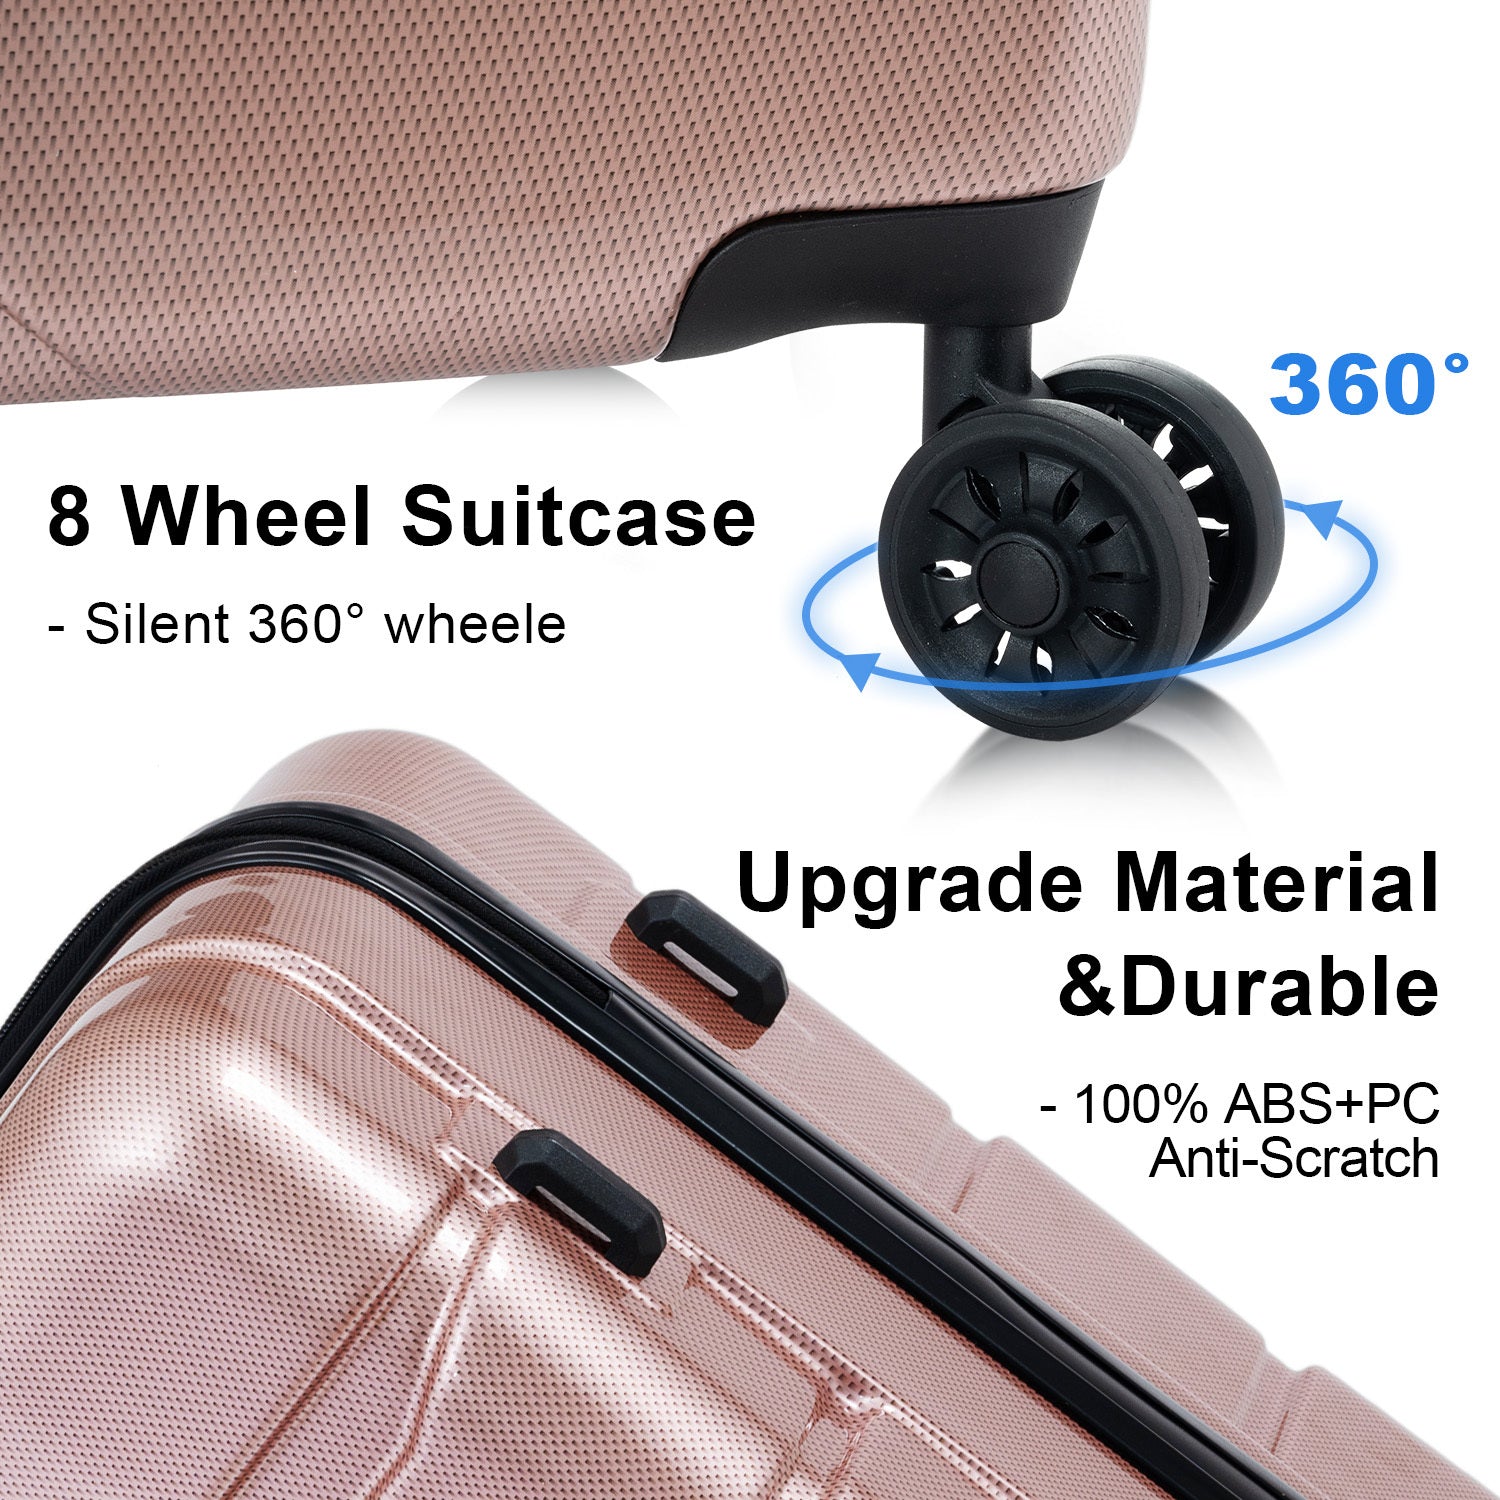 Luggage Sets ABS PC Hardshell 3pcs Clearance Luggage rose gold-abs+pc